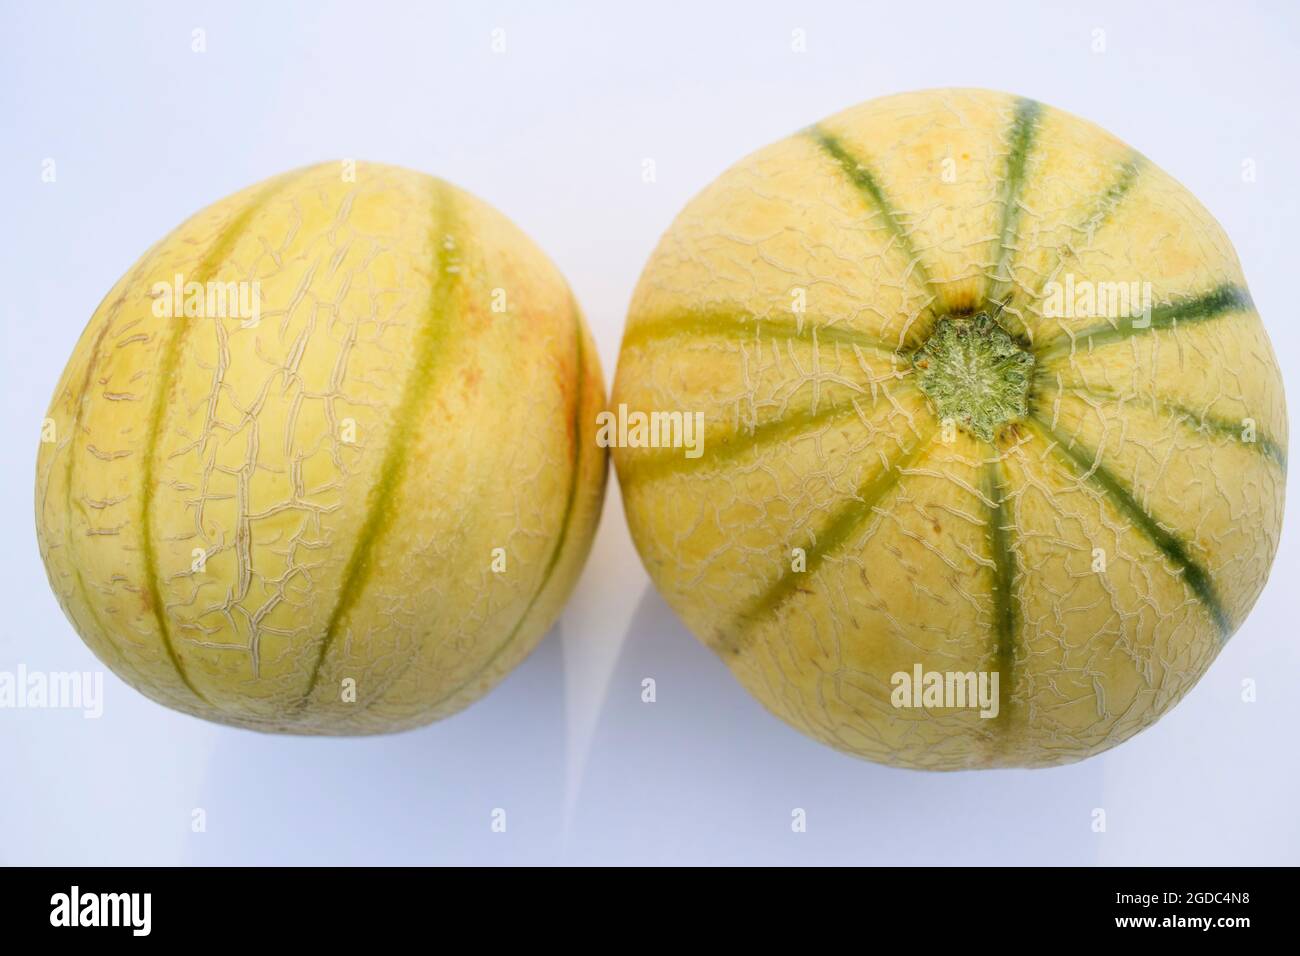 Topview and sideview of Muskmelon and Cantaloupe Fruits on white background. Light yellow textured with light green lined pattern on melons Stock Photo